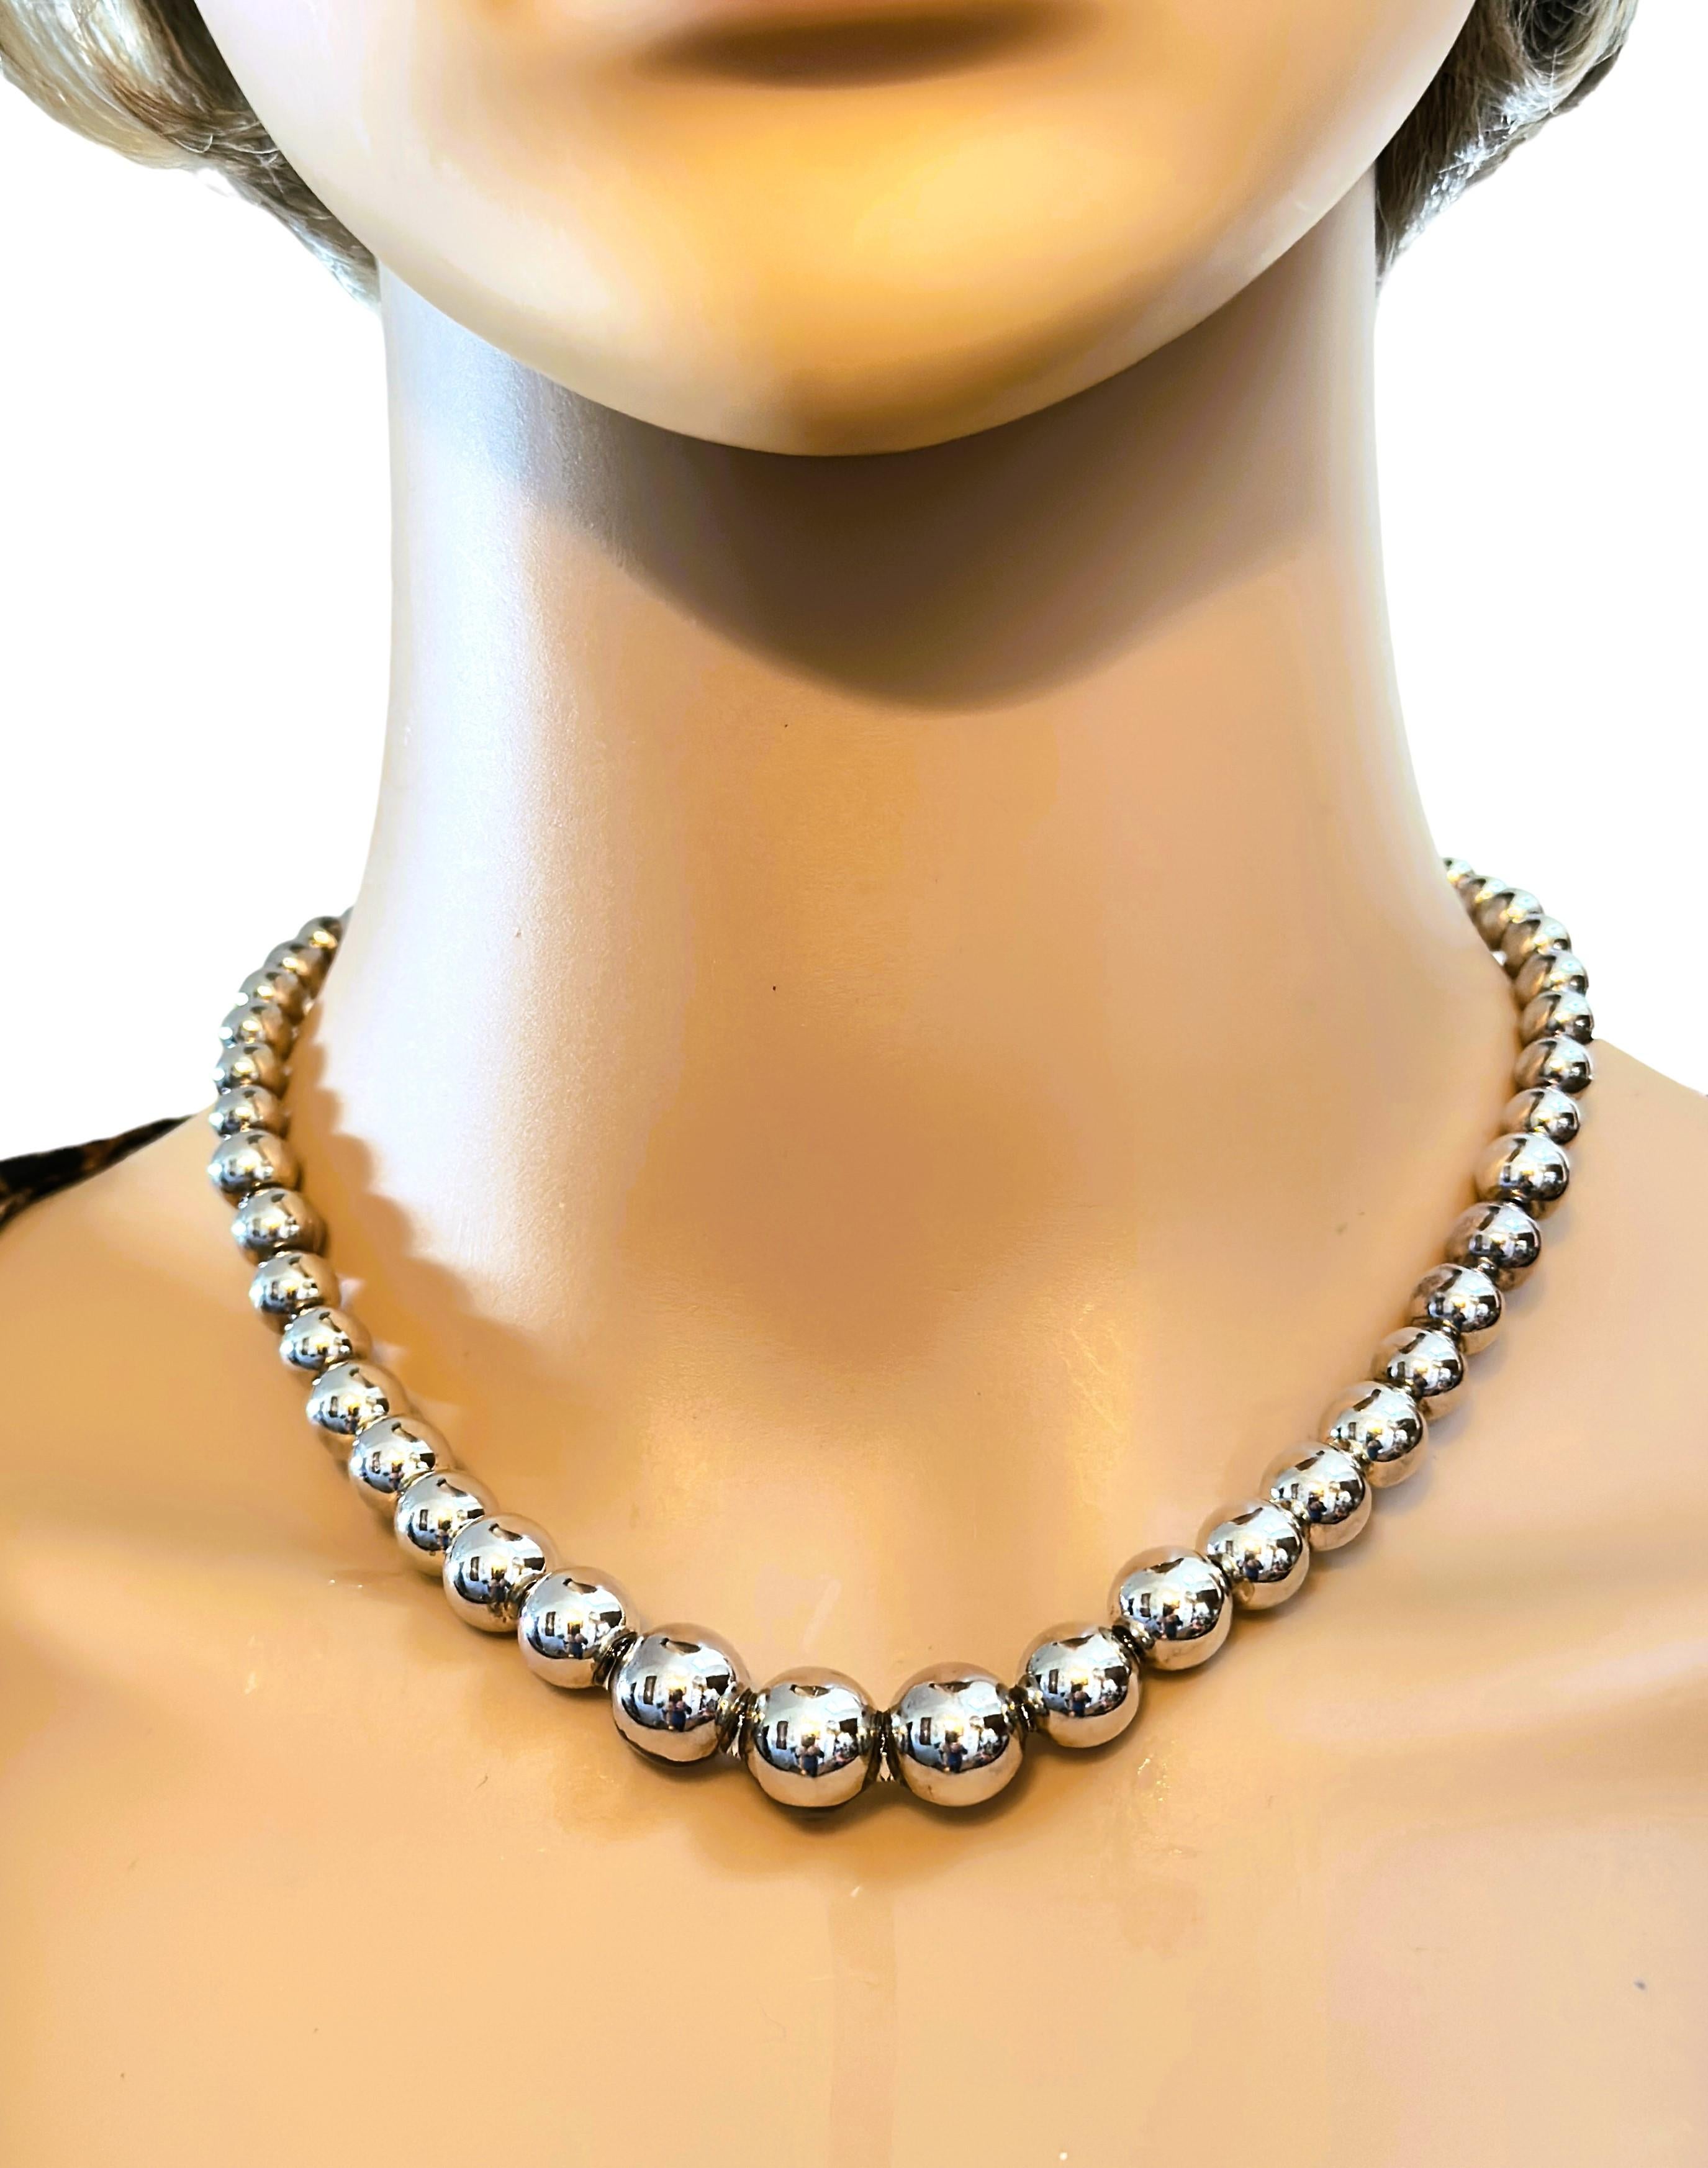 This is just a beautiful High Polish Tiffany necklace.  The sterling silver just glows on it.  It is pre-owned and in excellent condition.  At the clasp the smallest bead is 5.8 mm and it graduates to the largest bead in the center which measures